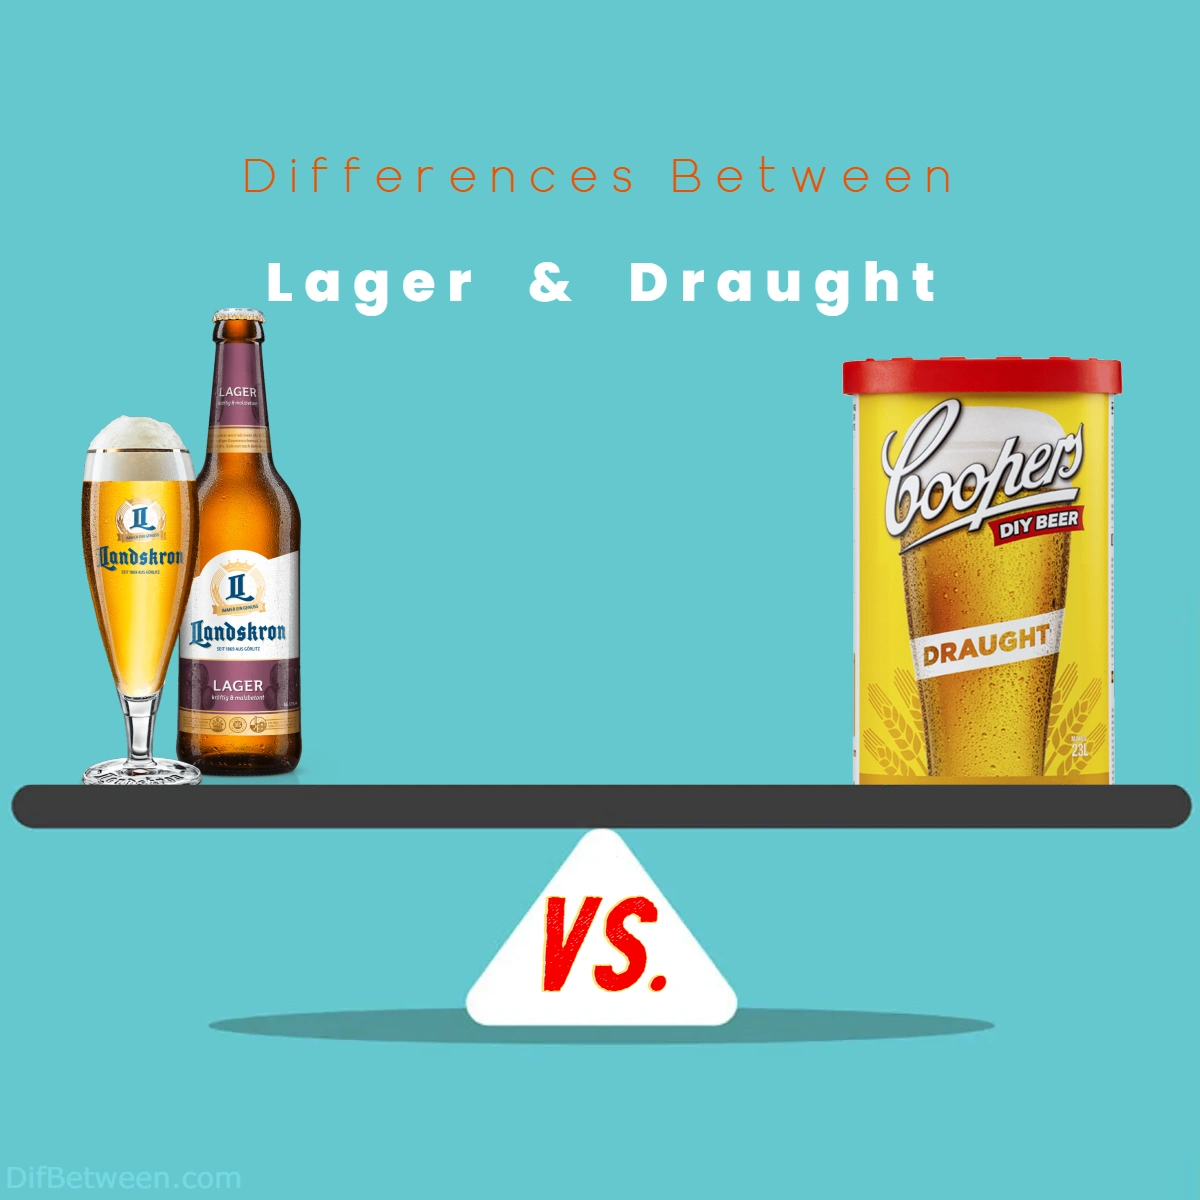 Difference Between Lager and Draught